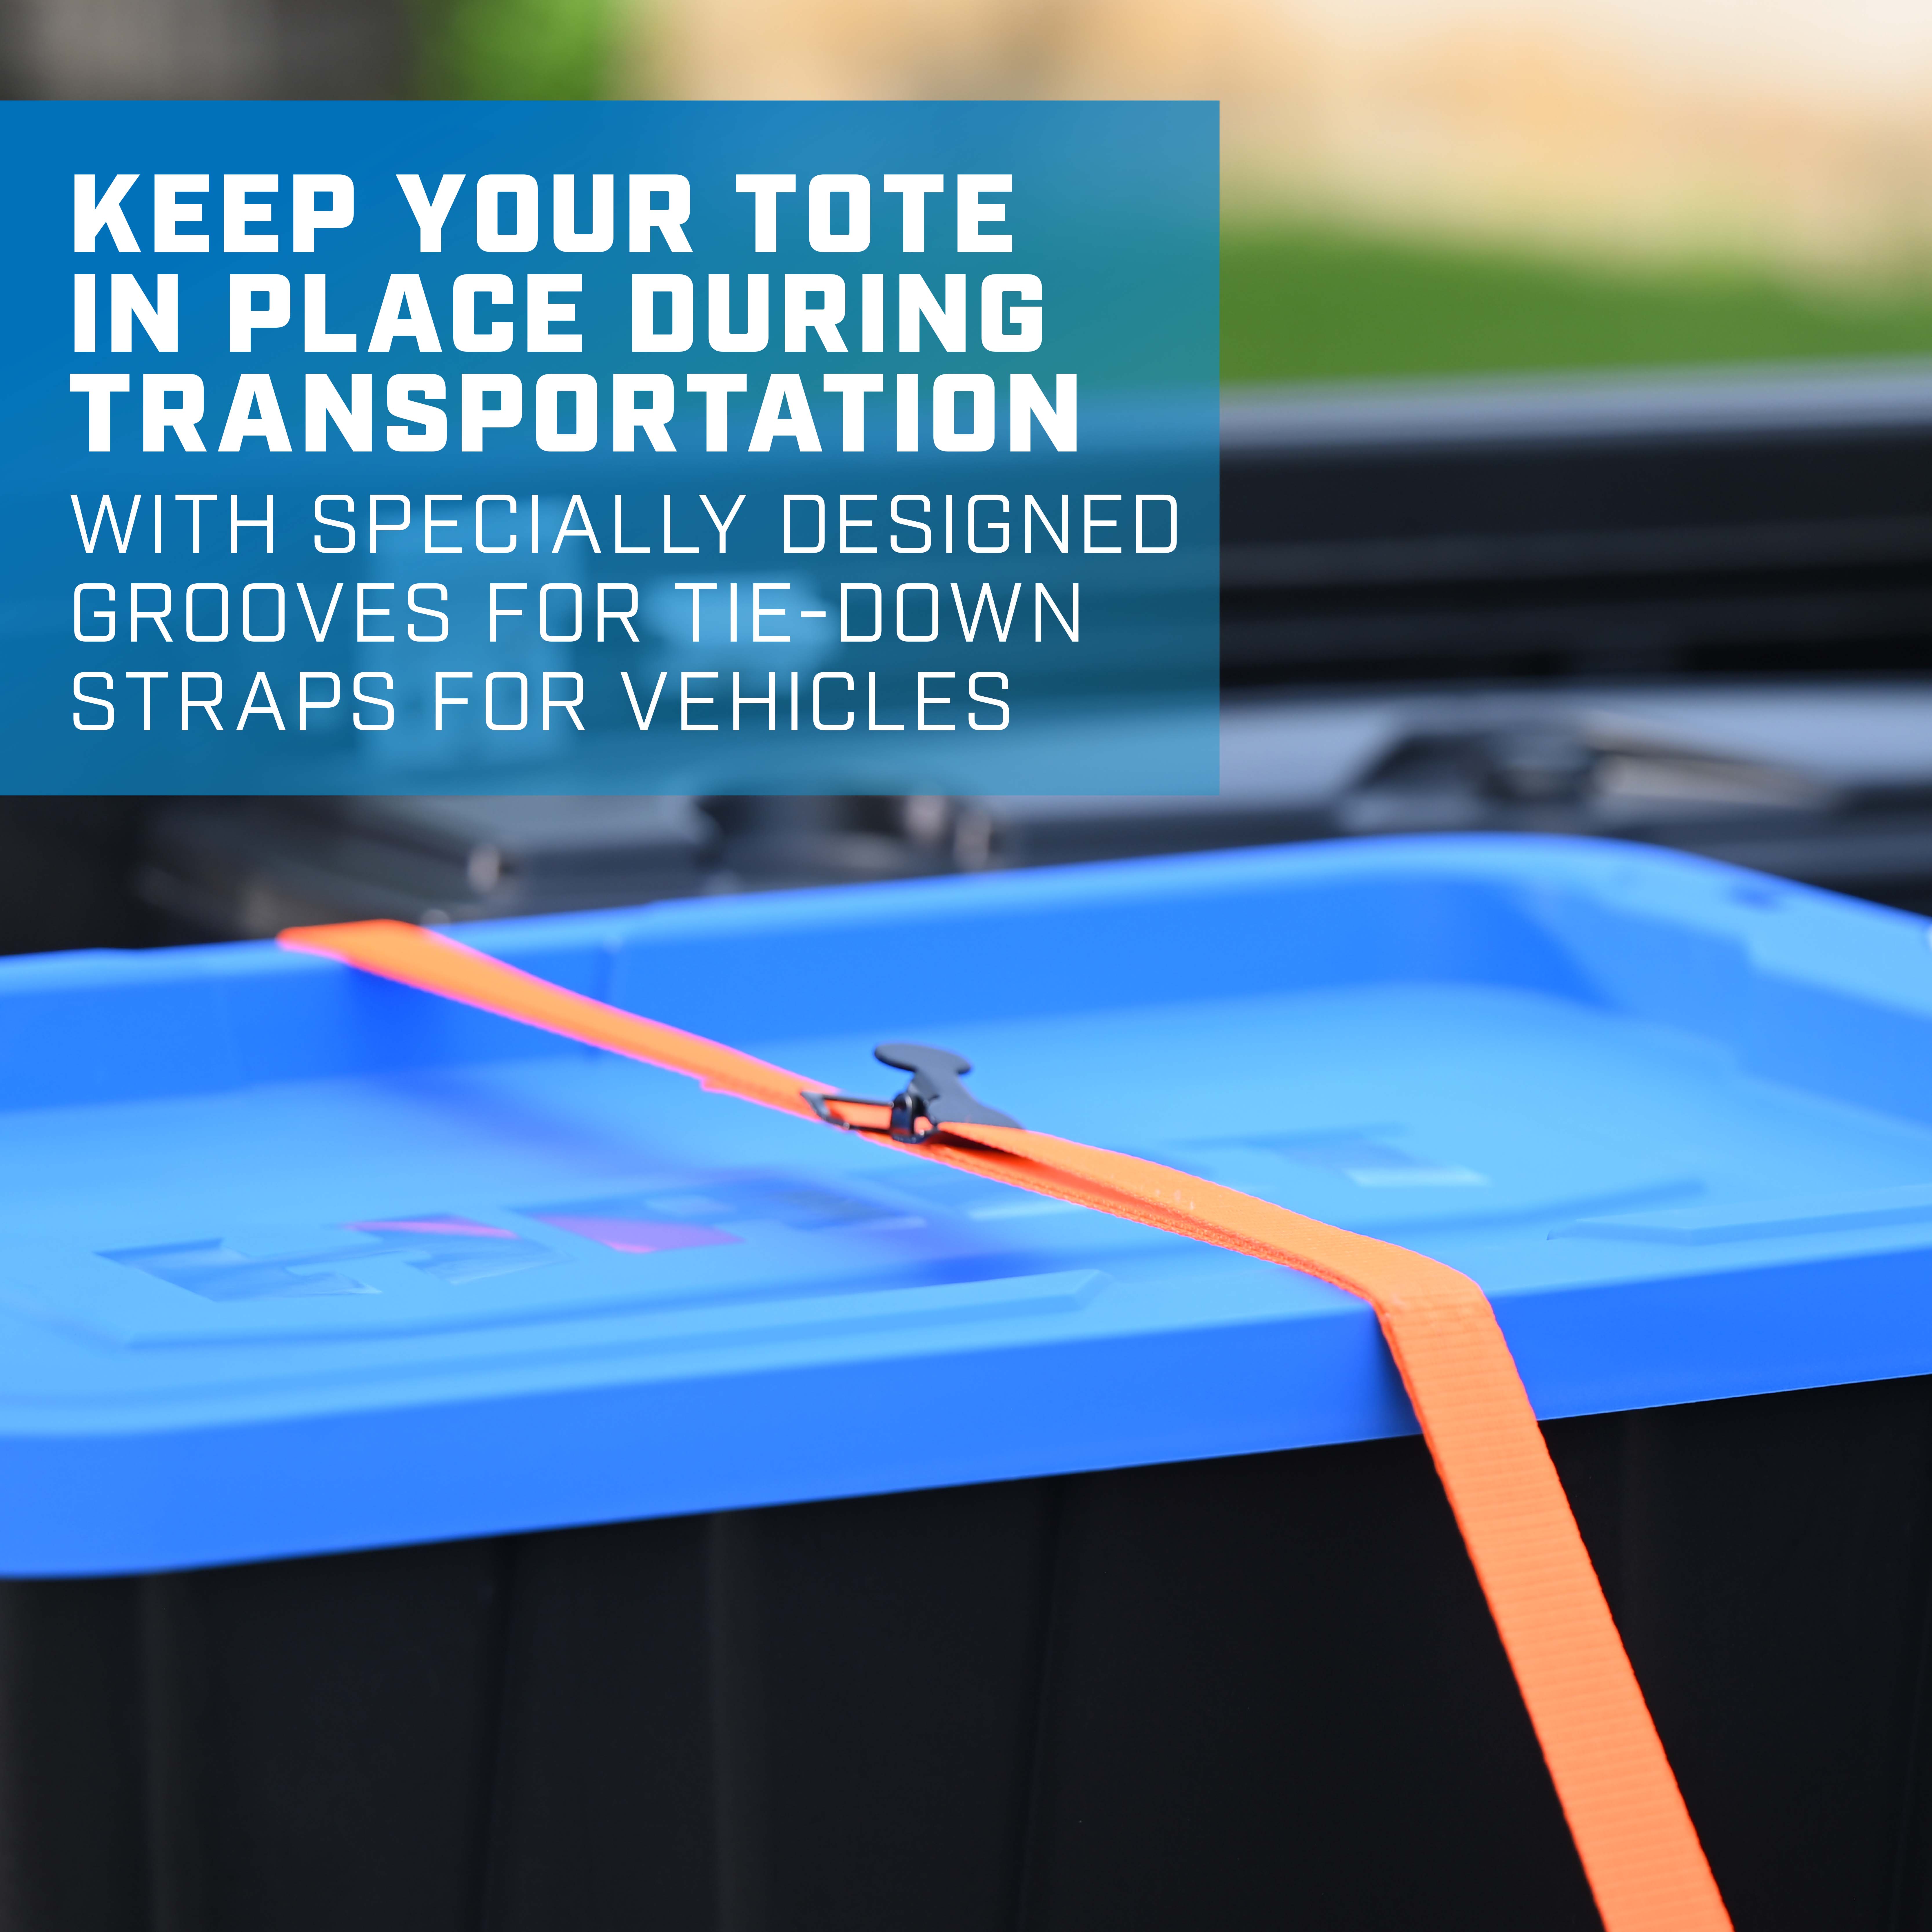 keep your tote in place during transportation with specially designed grooves for tie-down straps for vehicles